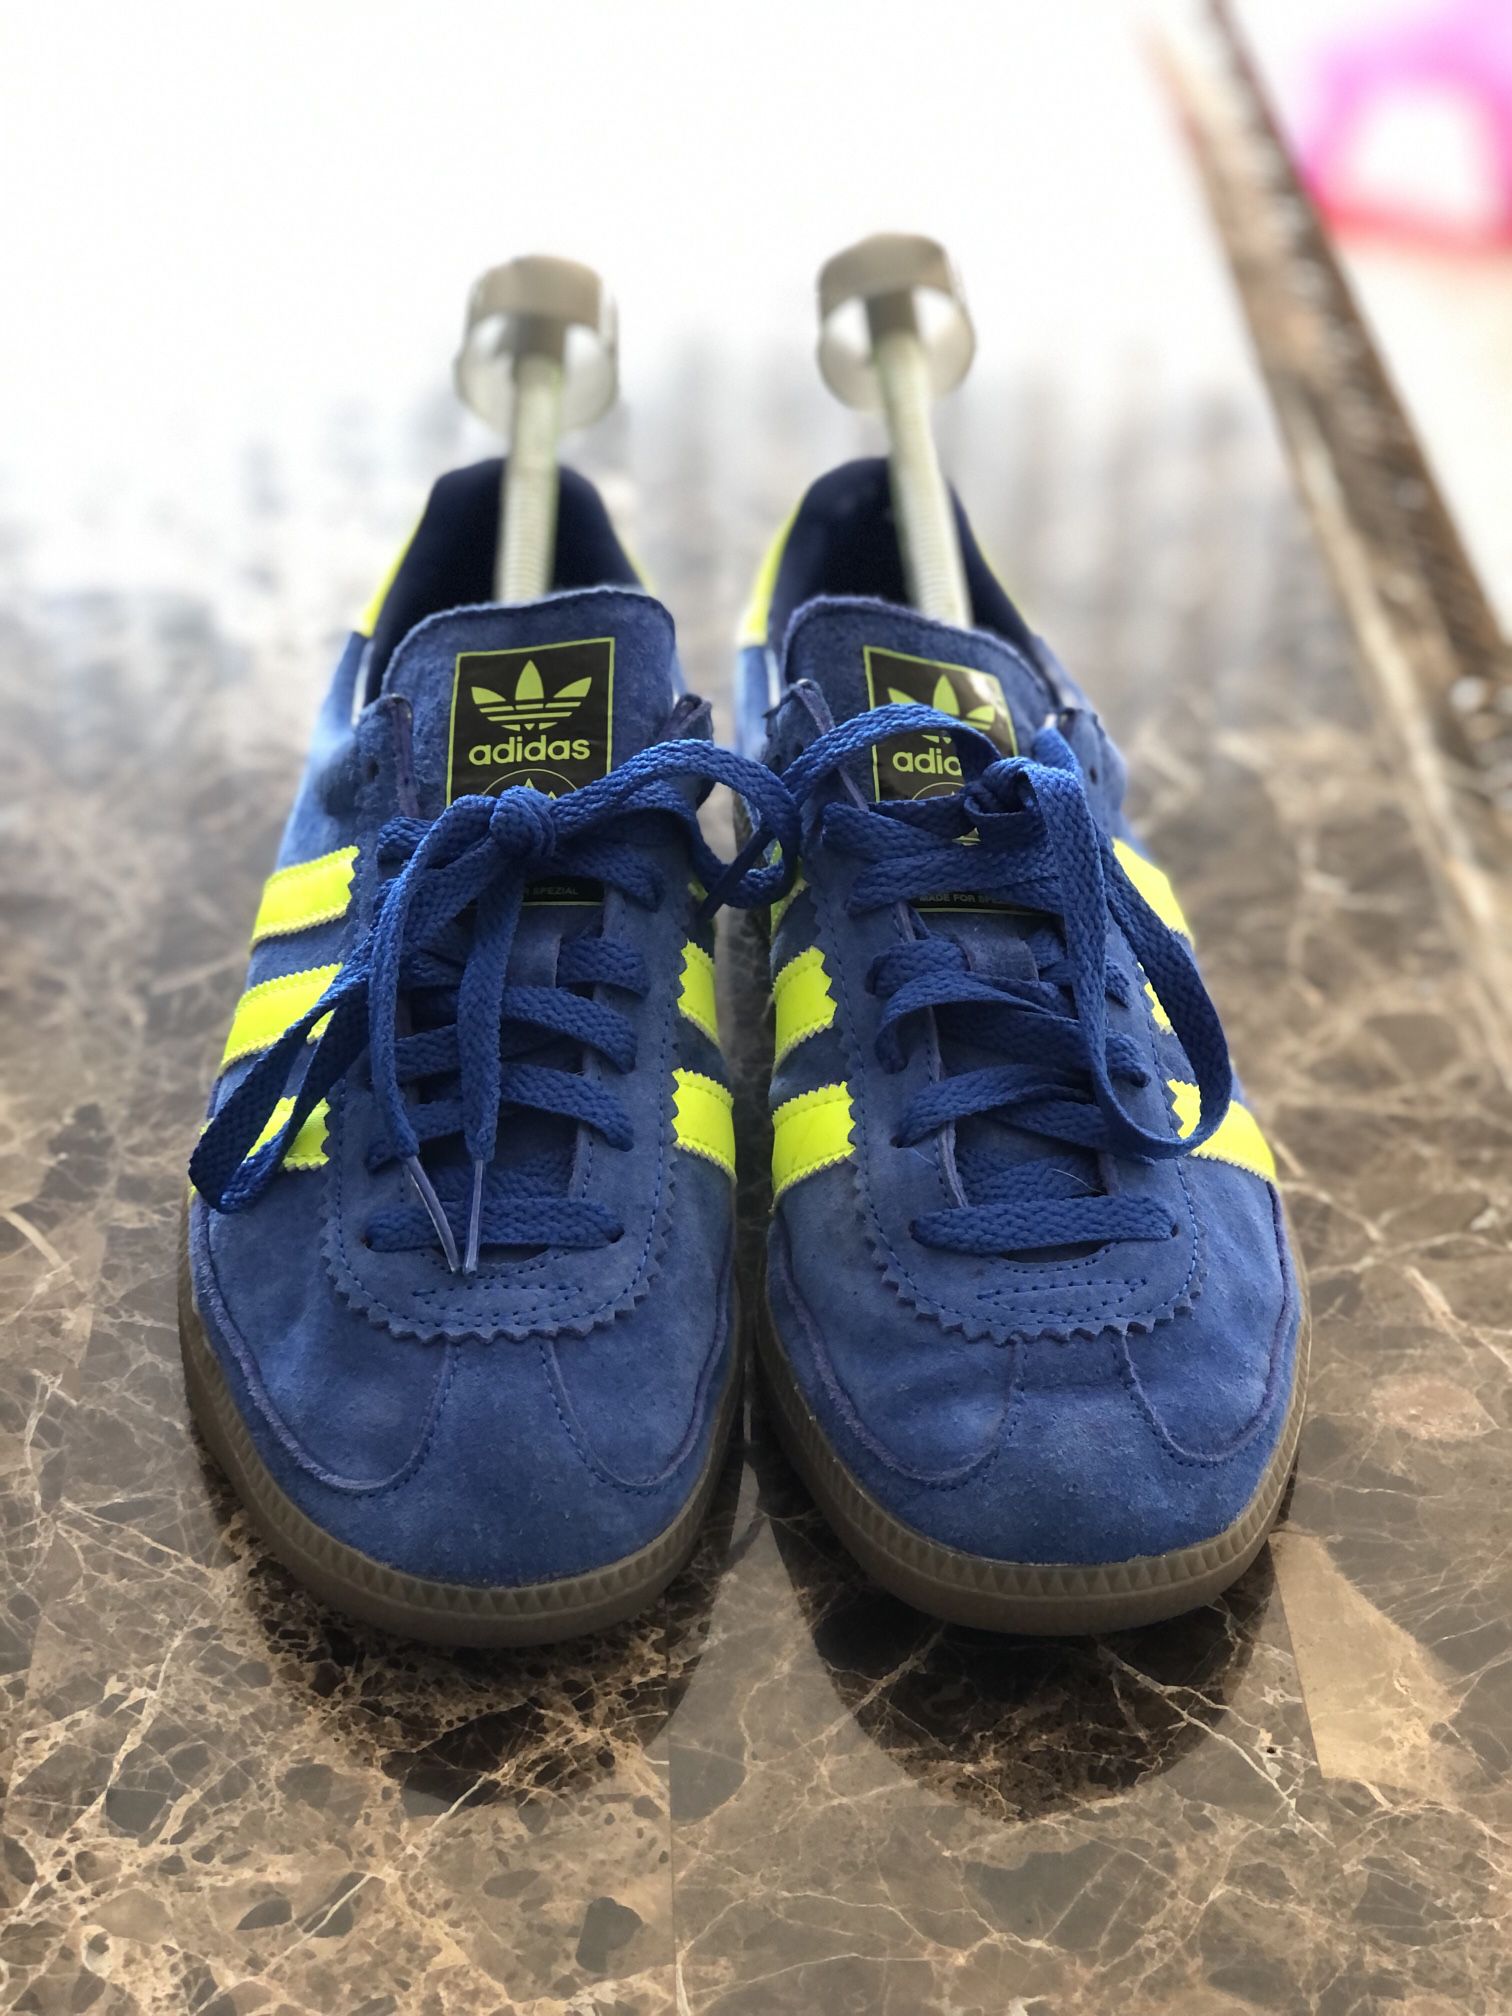 Adidas Spezial Whalley Active Blue 7.5 F35717 for Sale Spanish Flat, CA OfferUp